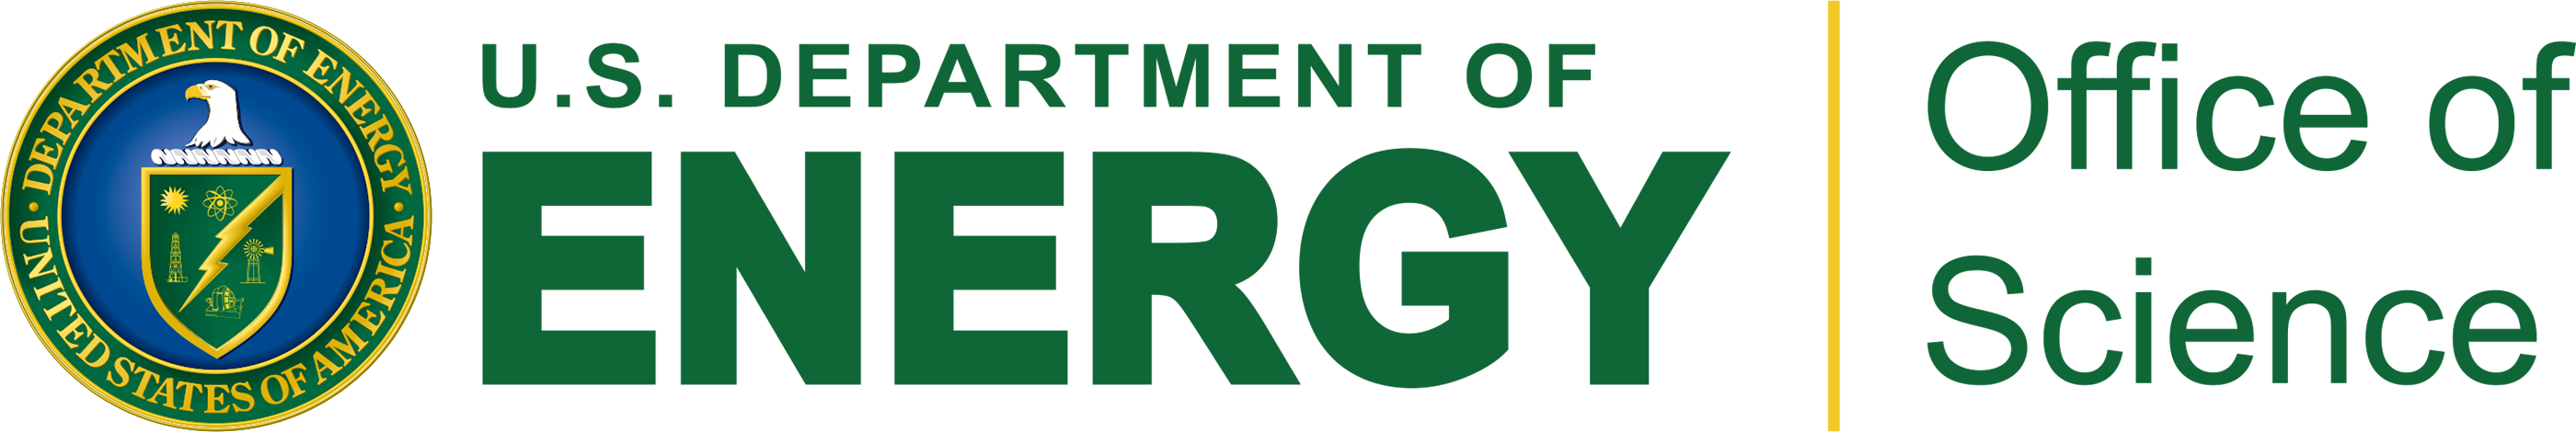 Department of Energy Office of Science logo